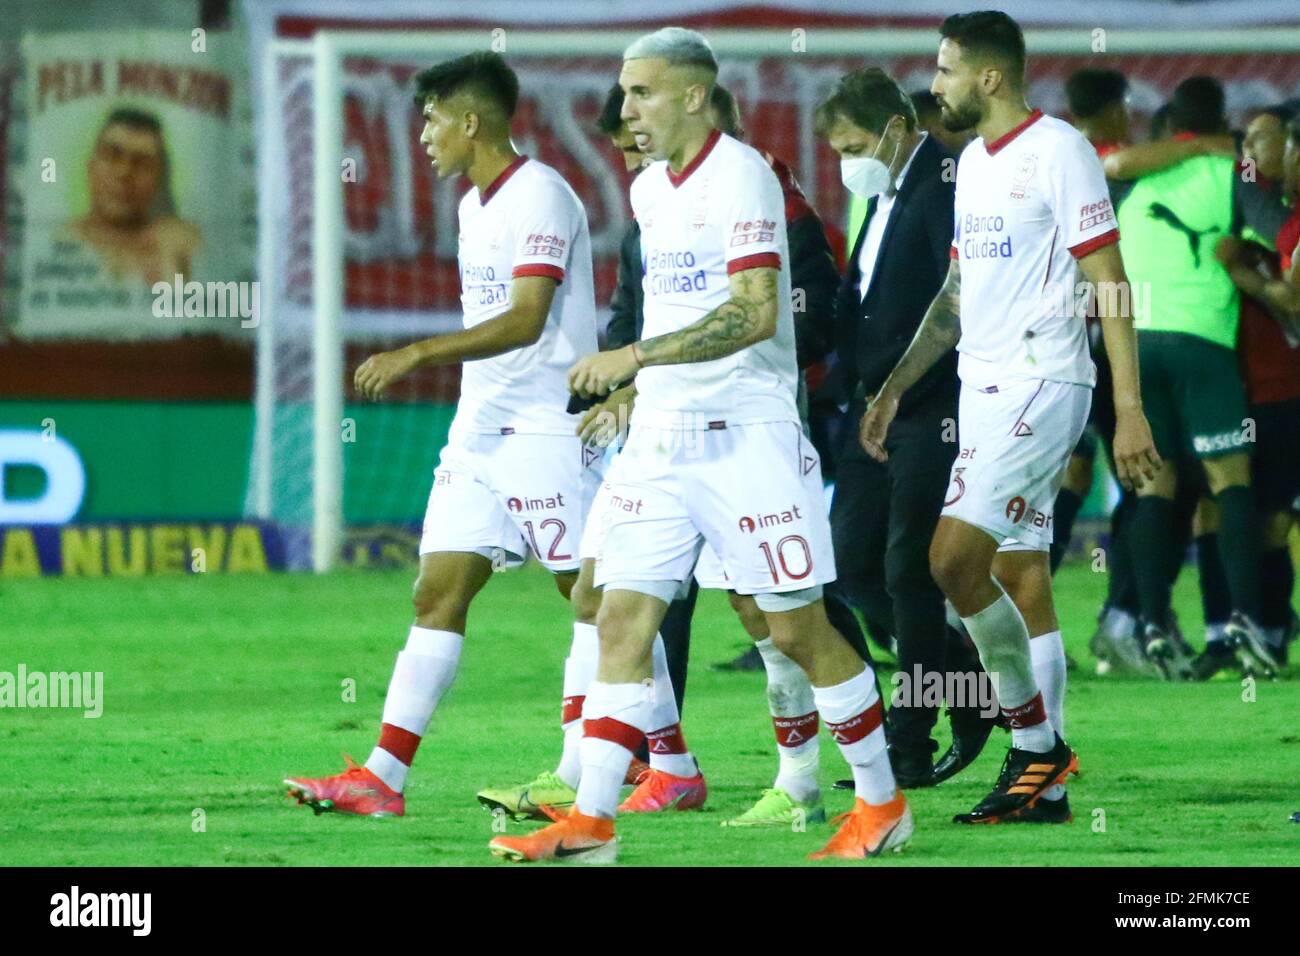 Club atletico huracan hi-res stock photography and images - Alamy